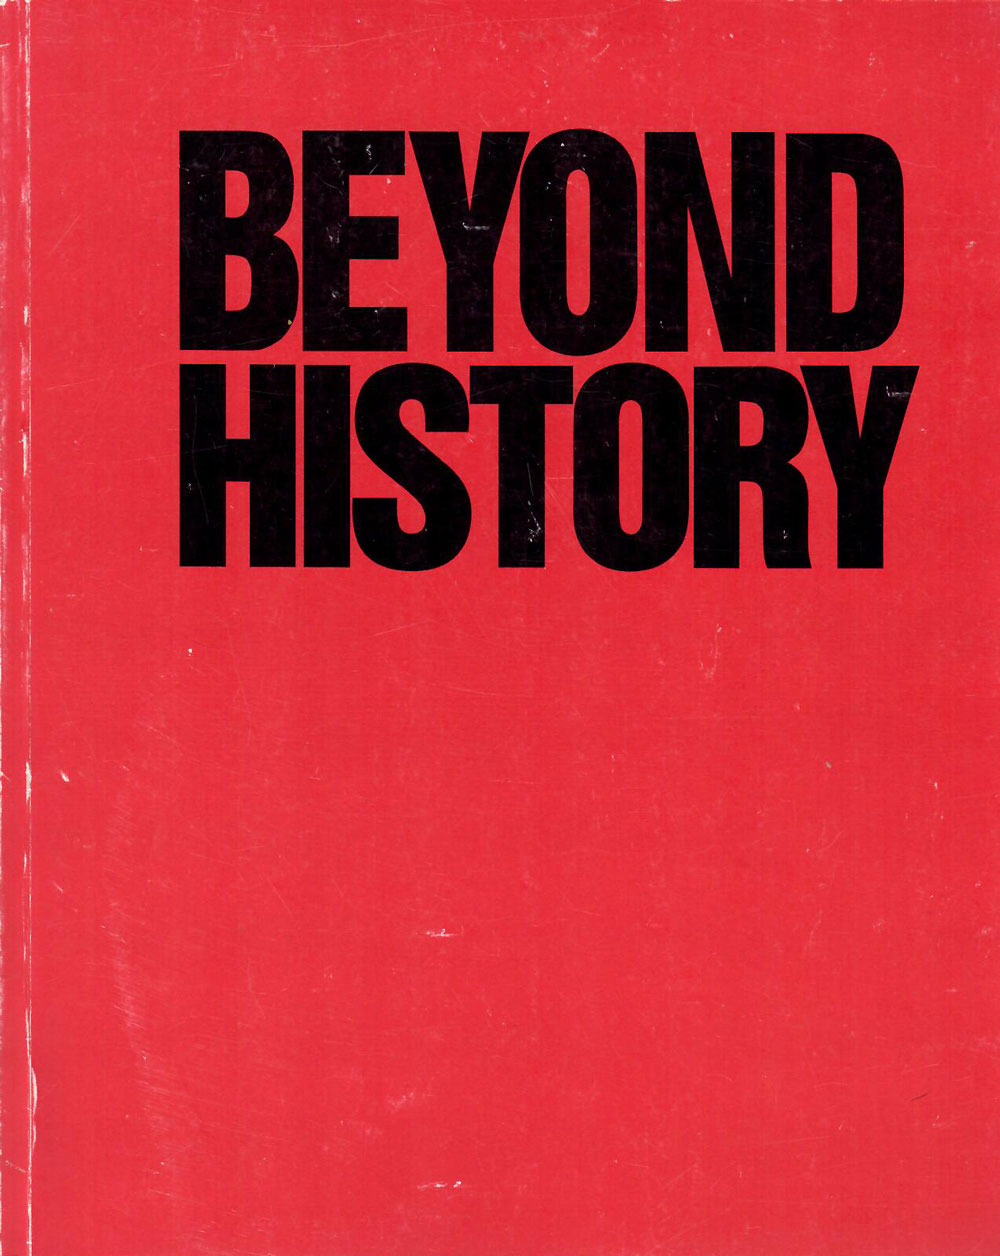 Beyond History catalogue cover